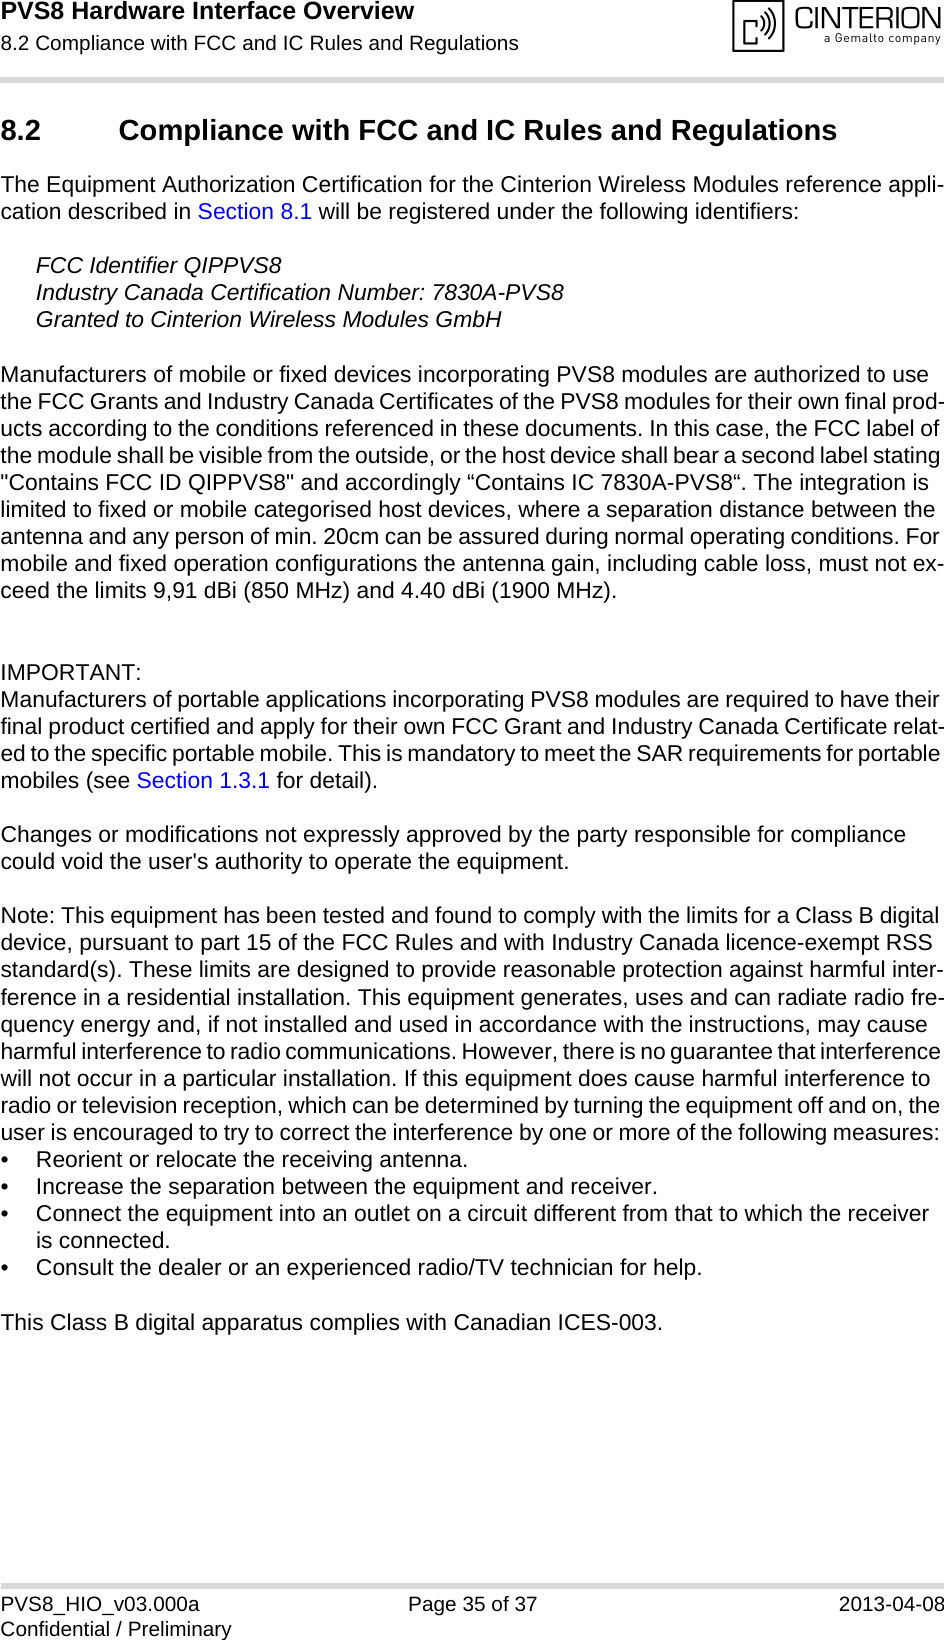 PVS8 Hardware Interface Overview8.2 Compliance with FCC and IC Rules and Regulations35PVS8_HIO_v03.000a Page 35 of 37 2013-04-08Confidential / Preliminary8.2 Compliance with FCC and IC Rules and Regulations The Equipment Authorization Certification for the Cinterion Wireless Modules reference appli-cation described in Section 8.1 will be registered under the following identifiers:FCC Identifier QIPPVS8Industry Canada Certification Number: 7830A-PVS8Granted to Cinterion Wireless Modules GmbH Manufacturers of mobile or fixed devices incorporating PVS8 modules are authorized to use the FCC Grants and Industry Canada Certificates of the PVS8 modules for their own final prod-ucts according to the conditions referenced in these documents. In this case, the FCC label of the module shall be visible from the outside, or the host device shall bear a second label stating &quot;Contains FCC ID QIPPVS8&quot; and accordingly “Contains IC 7830A-PVS8“. The integration is limited to fixed or mobile categorised host devices, where a separation distance between the antenna and any person of min. 20cm can be assured during normal operating conditions. For mobile and fixed operation configurations the antenna gain, including cable loss, must not ex-ceed the limits 9,91 dBi (850 MHz) and 4.40 dBi (1900 MHz).IMPORTANT:Manufacturers of portable applications incorporating PVS8 modules are required to have their final product certified and apply for their own FCC Grant and Industry Canada Certificate relat-ed to the specific portable mobile. This is mandatory to meet the SAR requirements for portable mobiles (see Section 1.3.1 for detail).Changes or modifications not expressly approved by the party responsible for compliance could void the user&apos;s authority to operate the equipment.Note: This equipment has been tested and found to comply with the limits for a Class B digital device, pursuant to part 15 of the FCC Rules and with Industry Canada licence-exempt RSS standard(s). These limits are designed to provide reasonable protection against harmful inter-ference in a residential installation. This equipment generates, uses and can radiate radio fre-quency energy and, if not installed and used in accordance with the instructions, may cause harmful interference to radio communications. However, there is no guarantee that interference will not occur in a particular installation. If this equipment does cause harmful interference to radio or television reception, which can be determined by turning the equipment off and on, the user is encouraged to try to correct the interference by one or more of the following measures: • Reorient or relocate the receiving antenna. • Increase the separation between the equipment and receiver. • Connect the equipment into an outlet on a circuit different from that to which the receiver is connected. • Consult the dealer or an experienced radio/TV technician for help.This Class B digital apparatus complies with Canadian ICES-003.